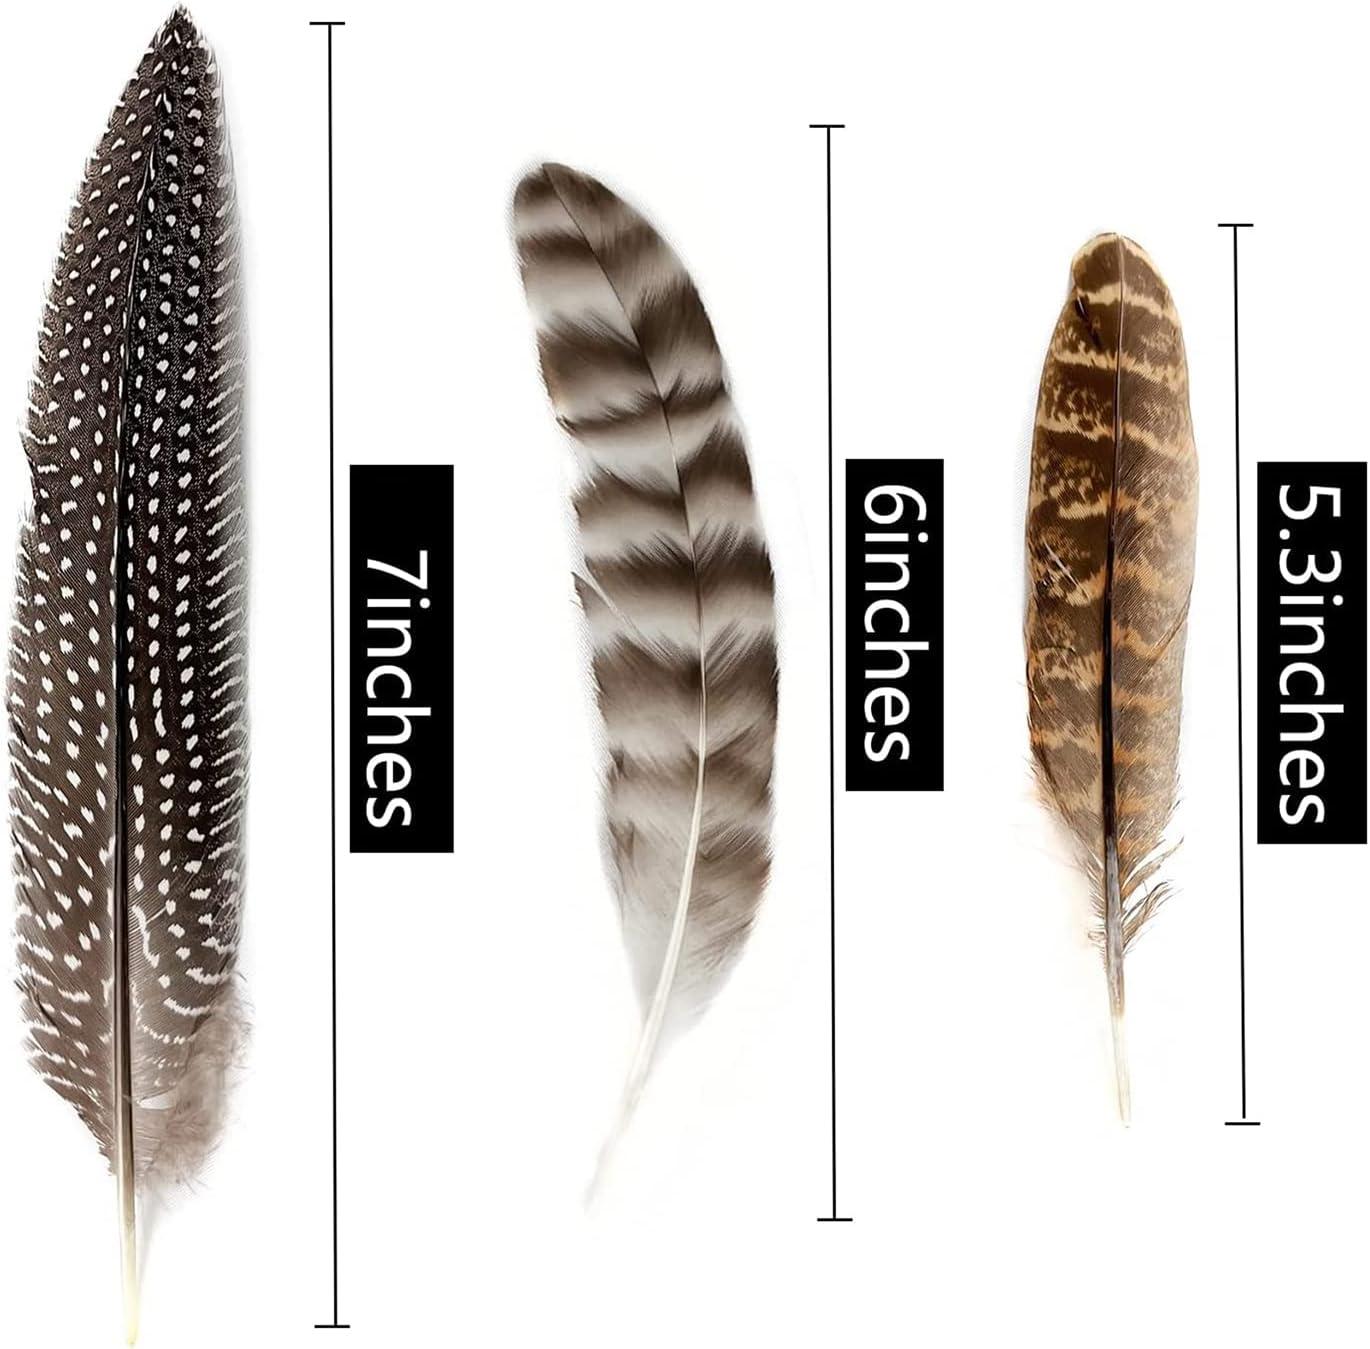 Natural Turkey Spotted Feathers 30Pcs Pheasant Feathers for Crafts DIY Hat  Floral Arrangements Wing Quill Wedding Home Party Decorations 6-8 inch(3  Styles) A Type